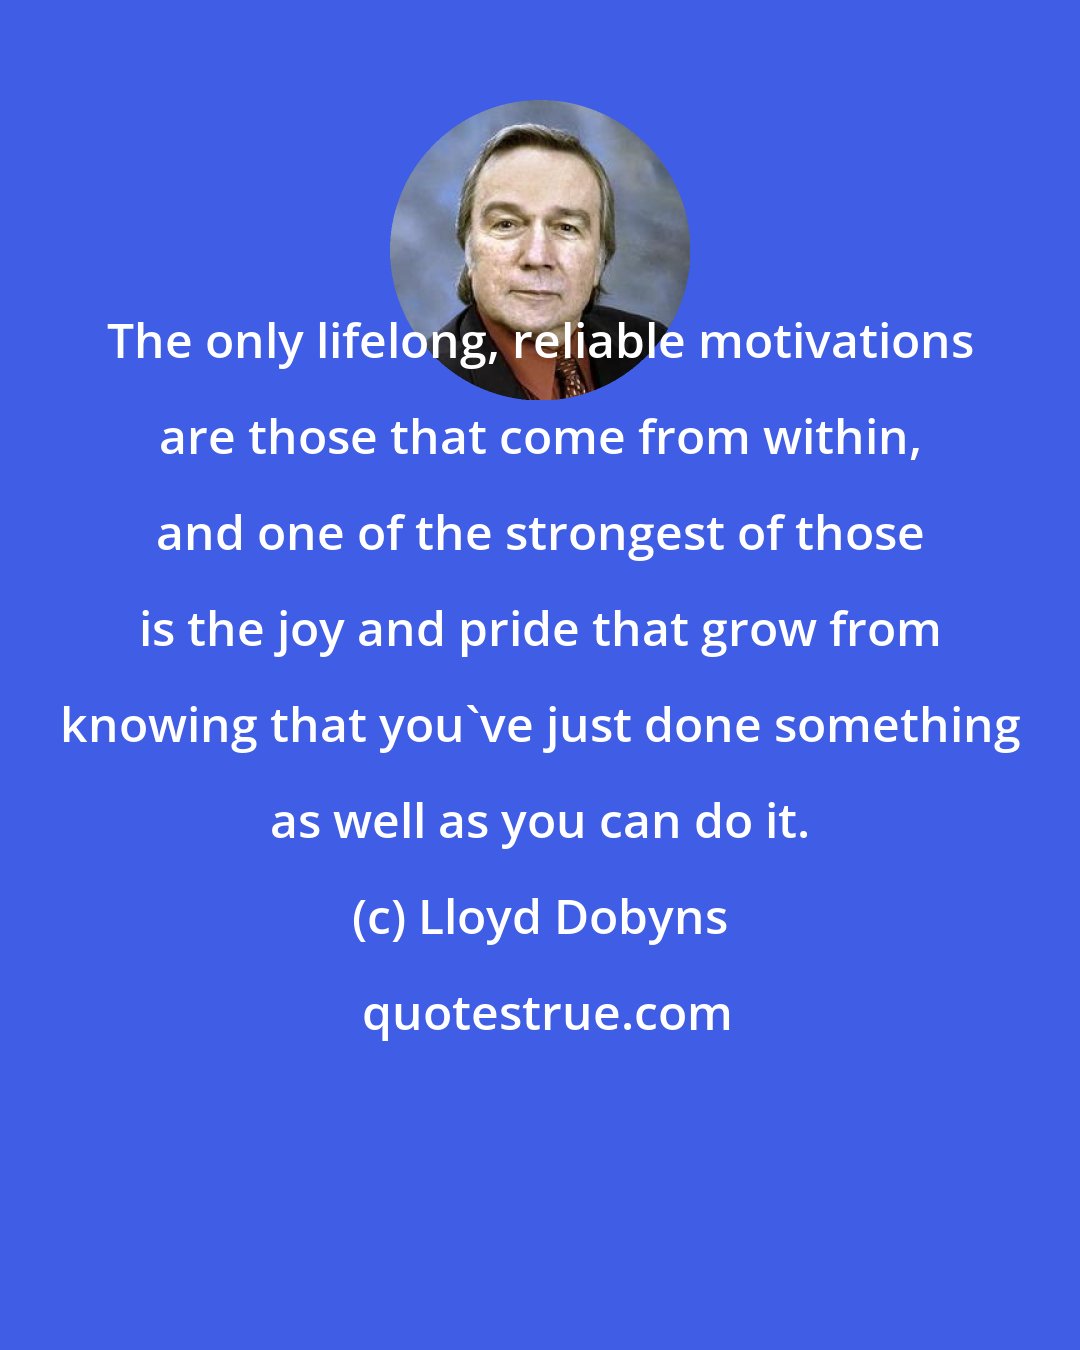 Lloyd Dobyns: The only lifelong, reliable motivations are those that come from within, and one of the strongest of those is the joy and pride that grow from knowing that you've just done something as well as you can do it.